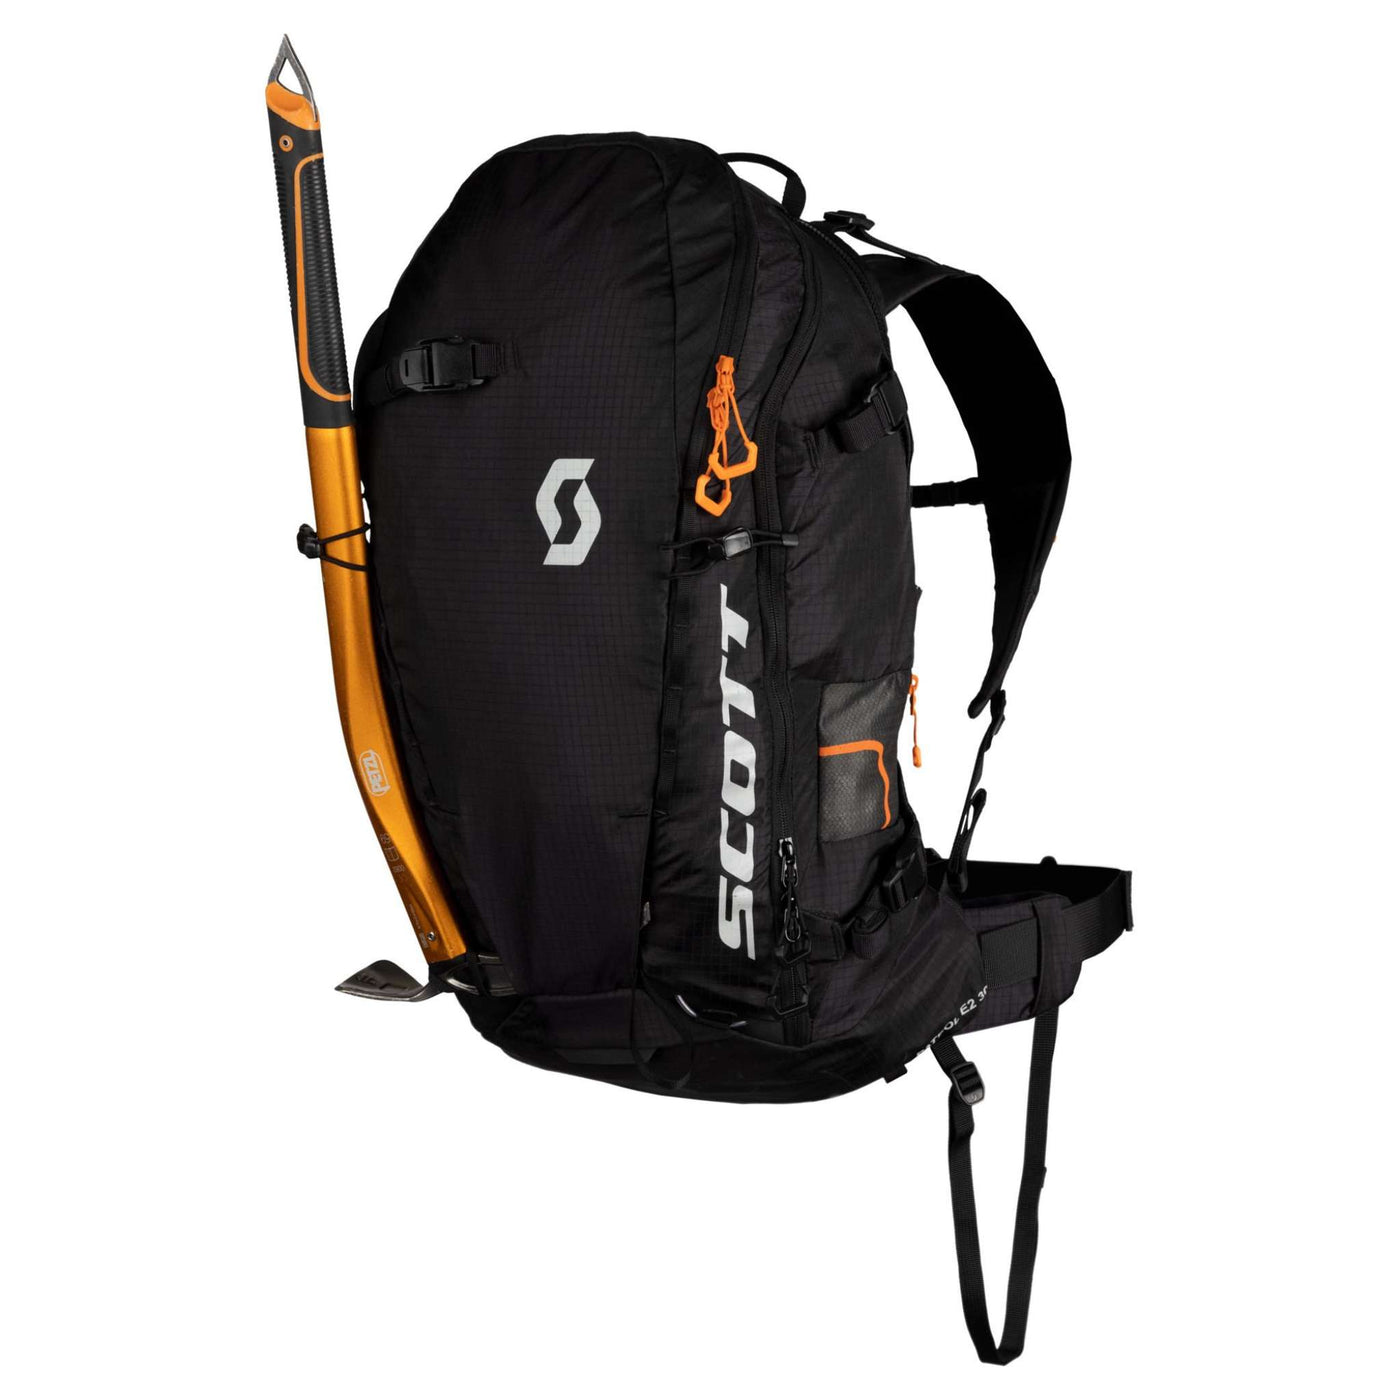 Scott Pack Patrol E2 30 Avalanche Pack | Airbag Pack NZ | Backcountry Ski Avalanche Airbag Backpack | Further Faster Christchurch NZ #black